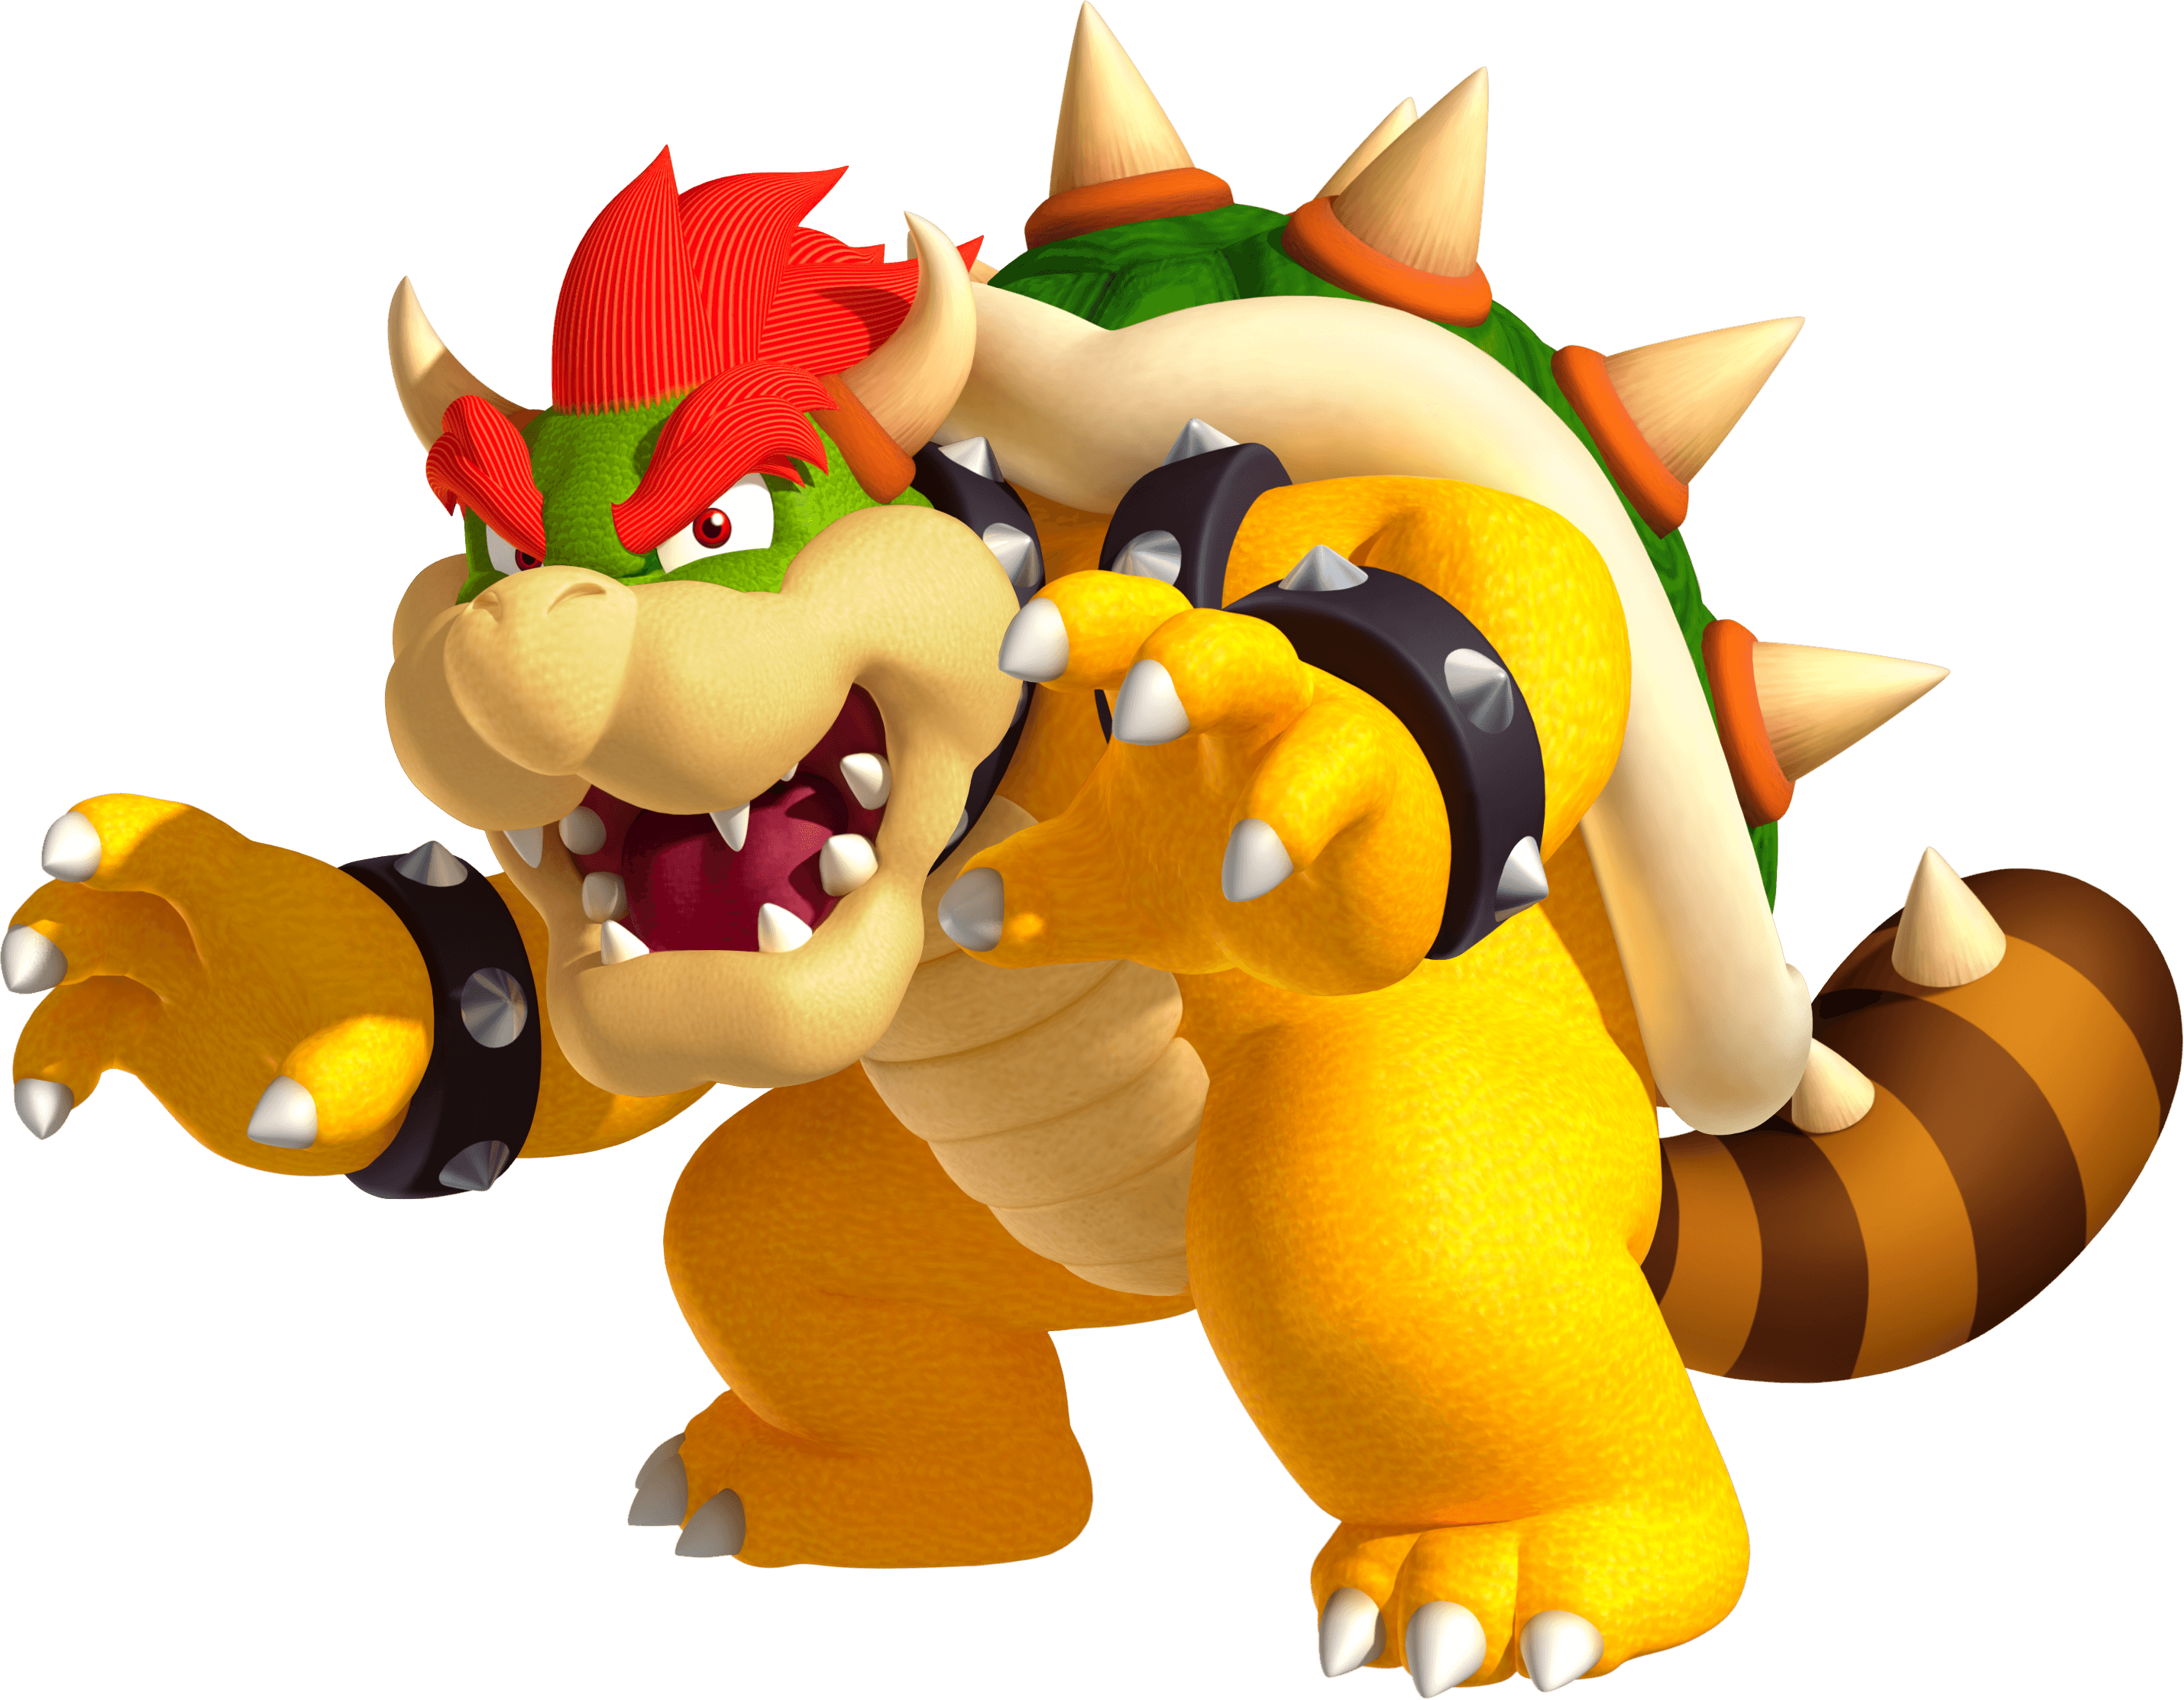 Bowser with Raccoon Power.